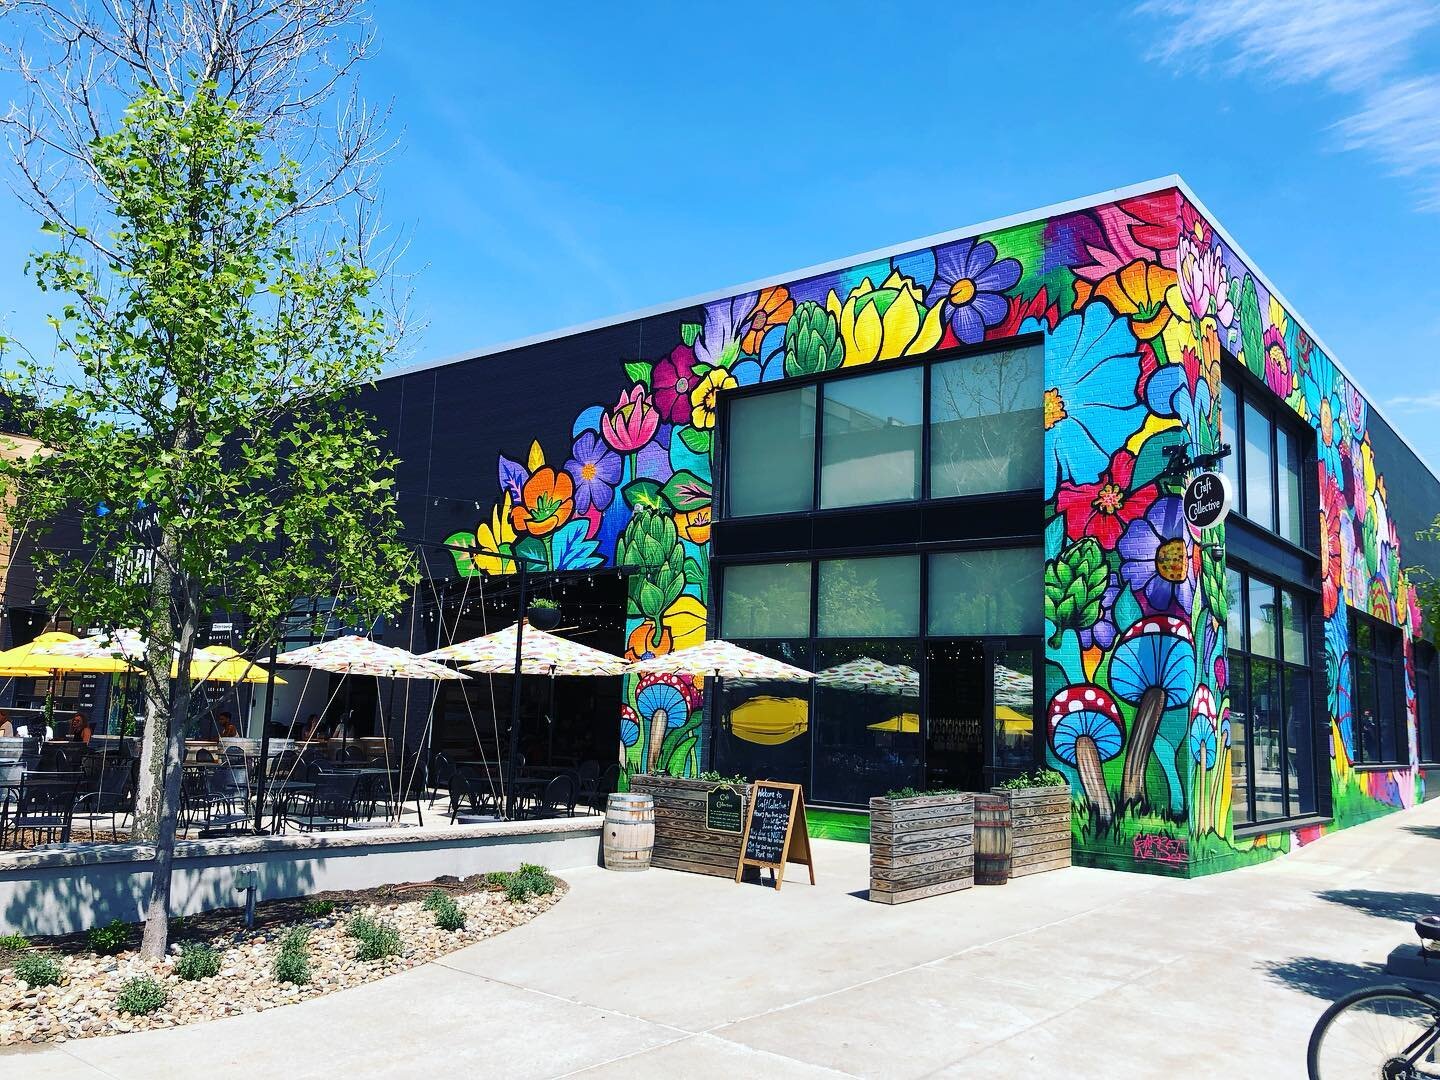 The mural is complete!! Thank you @garrettweider for your work and beautiful art!  It has breathed new life into the Van Aken District!

#craftcollectivevanaken #shakerheights #vanakenmarkethall #vanakendistrict